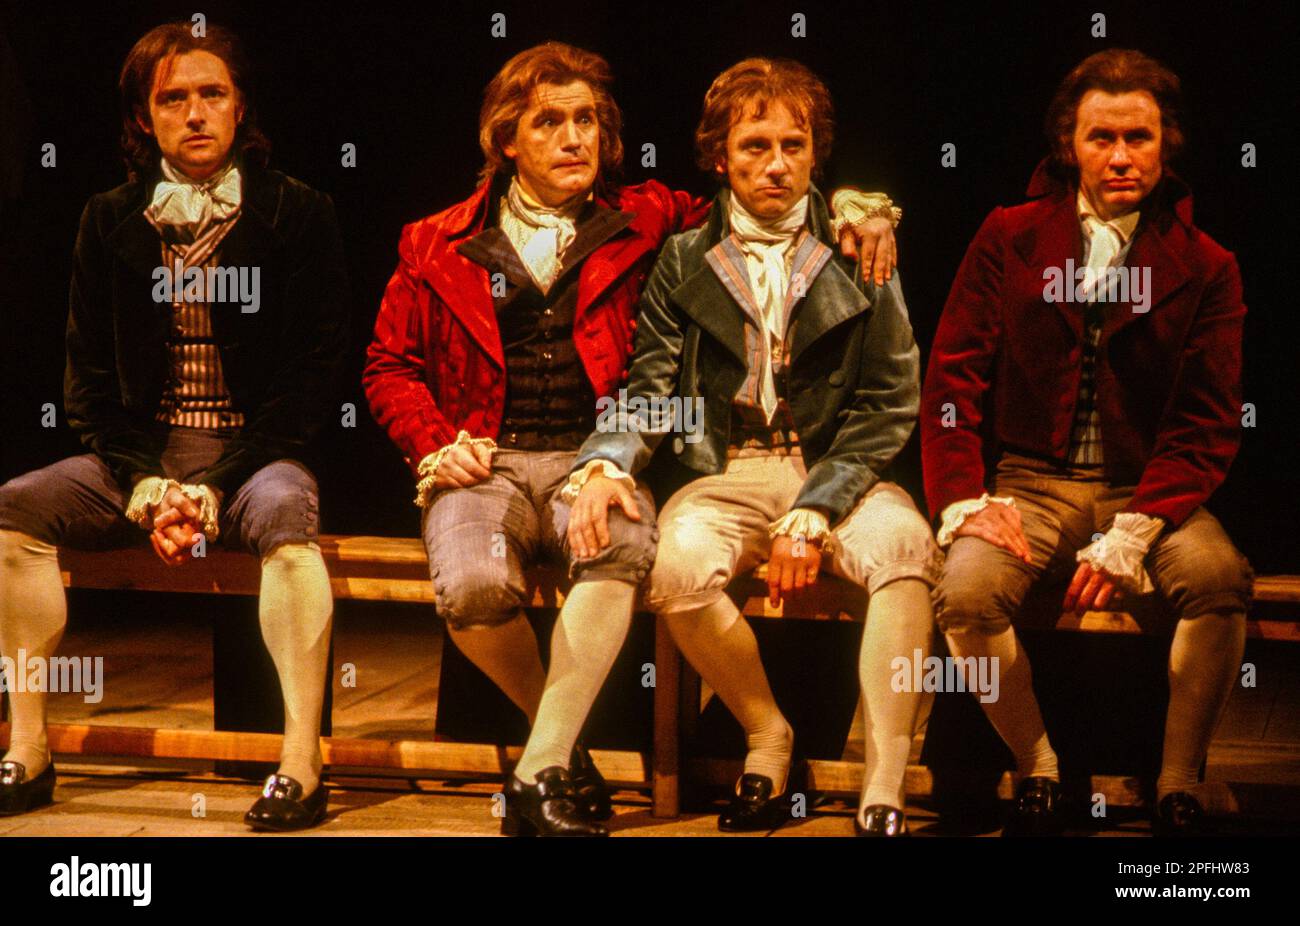 l-r: Anthony Higgins (Camille Desmoulins), Brian Cox (Danton), Tom Georgeson (Philippeau), Paul Moriarty (Lacroix) in DANTON'S DEATH by Georg Buchner at the Olivier Theatre, National Theatre (NT), London SE1  21/07/1982  in a new version by Howard Brenton  design: Alison Chitty  lighting: Stephen Wentworth  director: Peter Gill Stock Photo